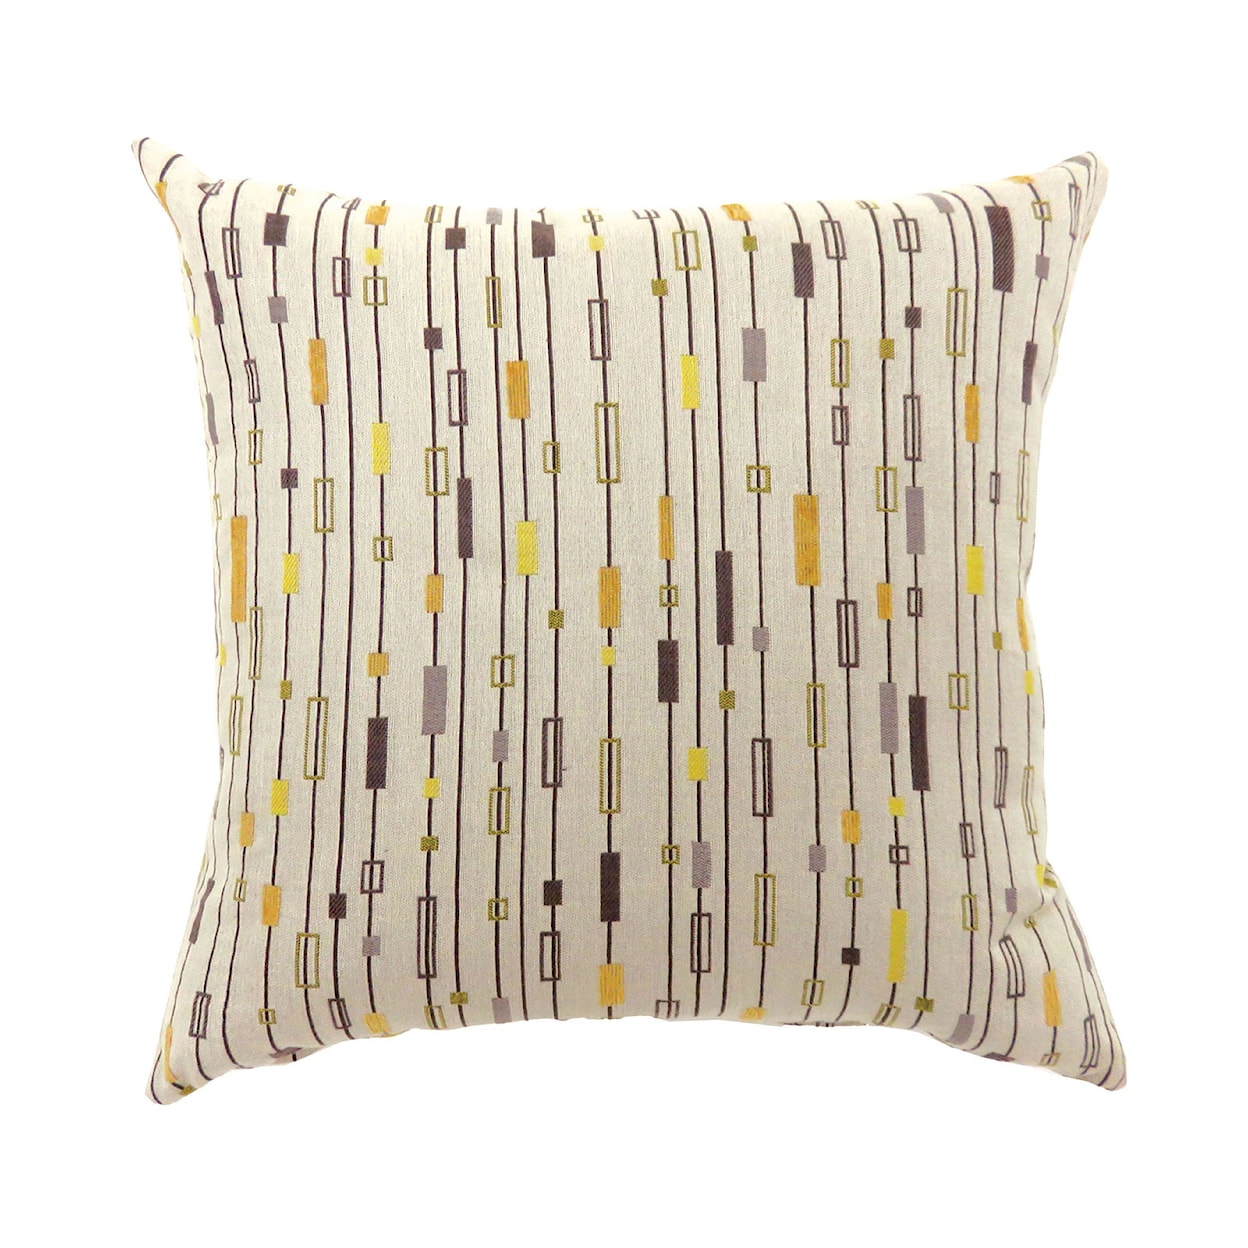 Furniture of America Lina Accent Pillow